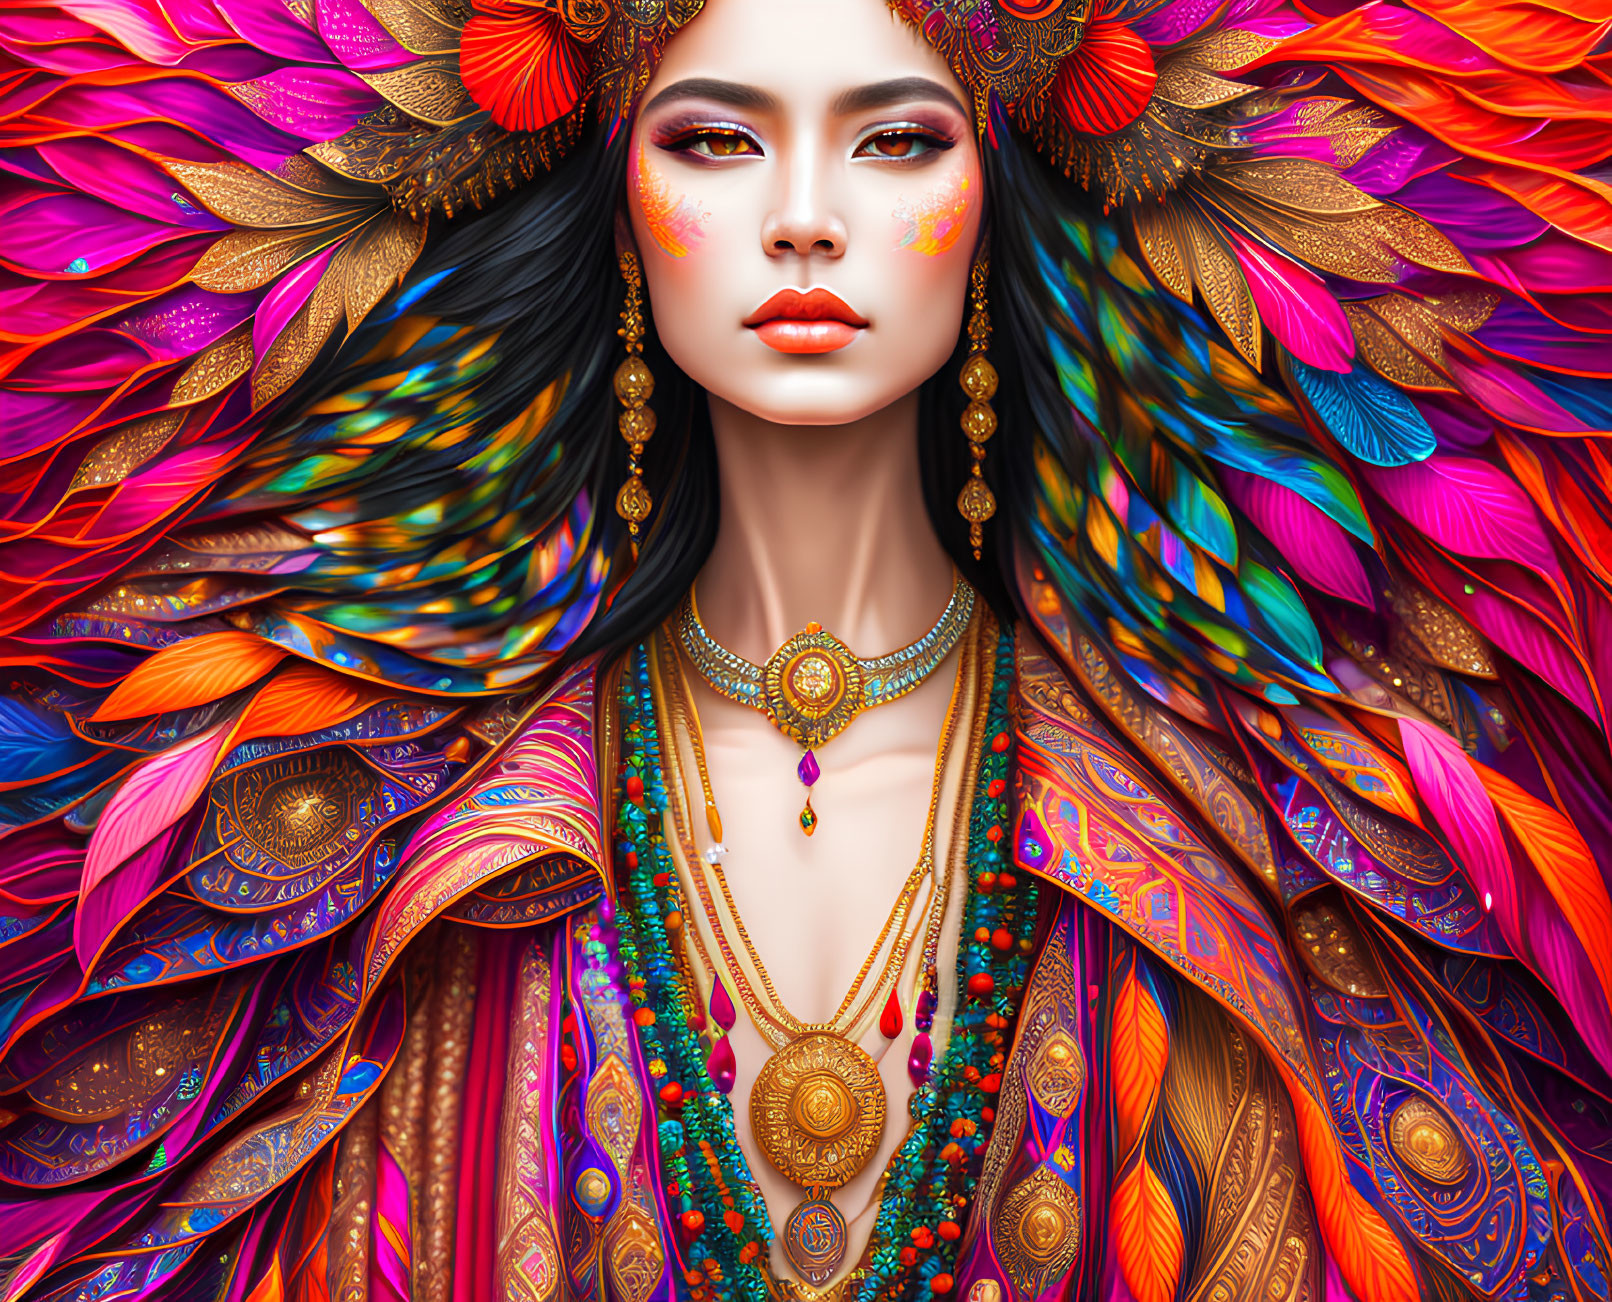 Colorful portrait of a woman in feathered attire and elaborate jewelry with striking makeup.